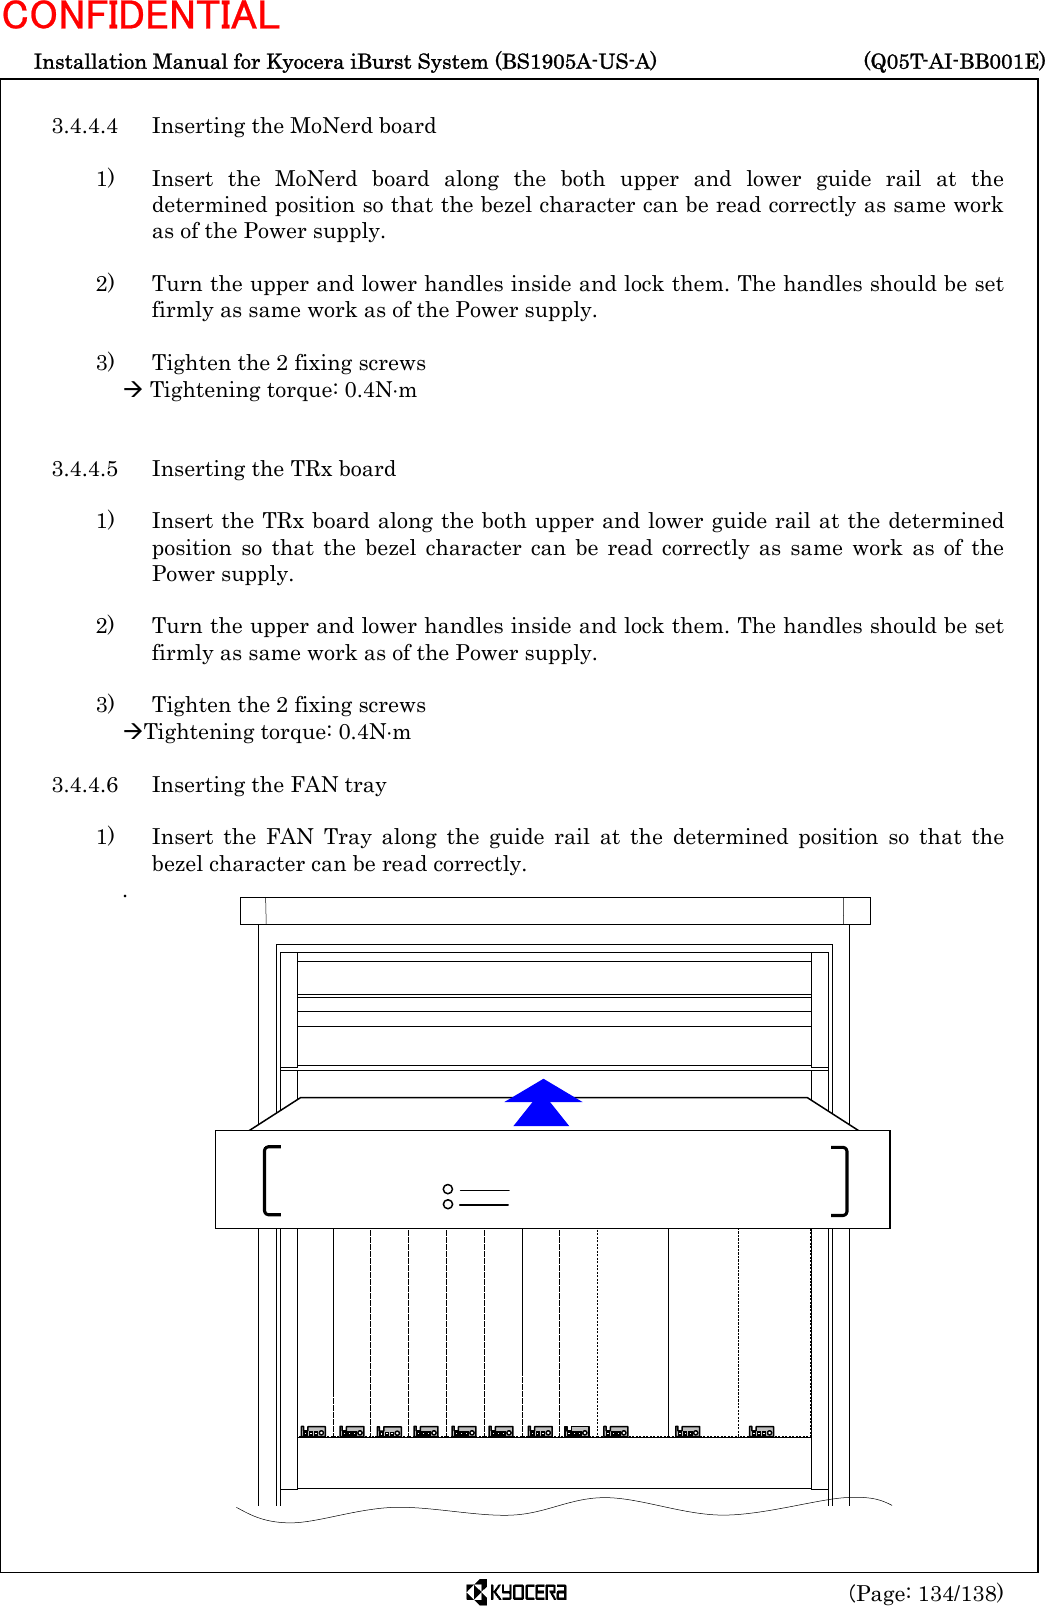  Installation Manual for Kyocera iBurst System (BS1905A-US-A)     (Q05T-AI-BB001E) (Page: 134/138) CONFIDENTIAL  3.4.4.4  Inserting the MoNerd board  1)   Insert the MoNerd board along the both upper and lower guide rail at the determined position so that the bezel character can be read correctly as same work as of the Power supply.  2)    Turn the upper and lower handles inside and lock them. The handles should be set firmly as same work as of the Power supply.  3)    Tighten the 2 fixing screws Æ Tightening torque: 0.4N⋅m   3.4.4.5  Inserting the TRx board  1)    Insert the TRx board along the both upper and lower guide rail at the determined position so that the bezel character can be read correctly as same work as of the Power supply.  2)    Turn the upper and lower handles inside and lock them. The handles should be set firmly as same work as of the Power supply.  3)    Tighten the 2 fixing screws ÆTightening torque: 0.4N⋅m  3.4.4.6  Inserting the FAN tray  1)   Insert the FAN Tray along the guide rail at the determined position so that the bezel character can be read correctly. .                          